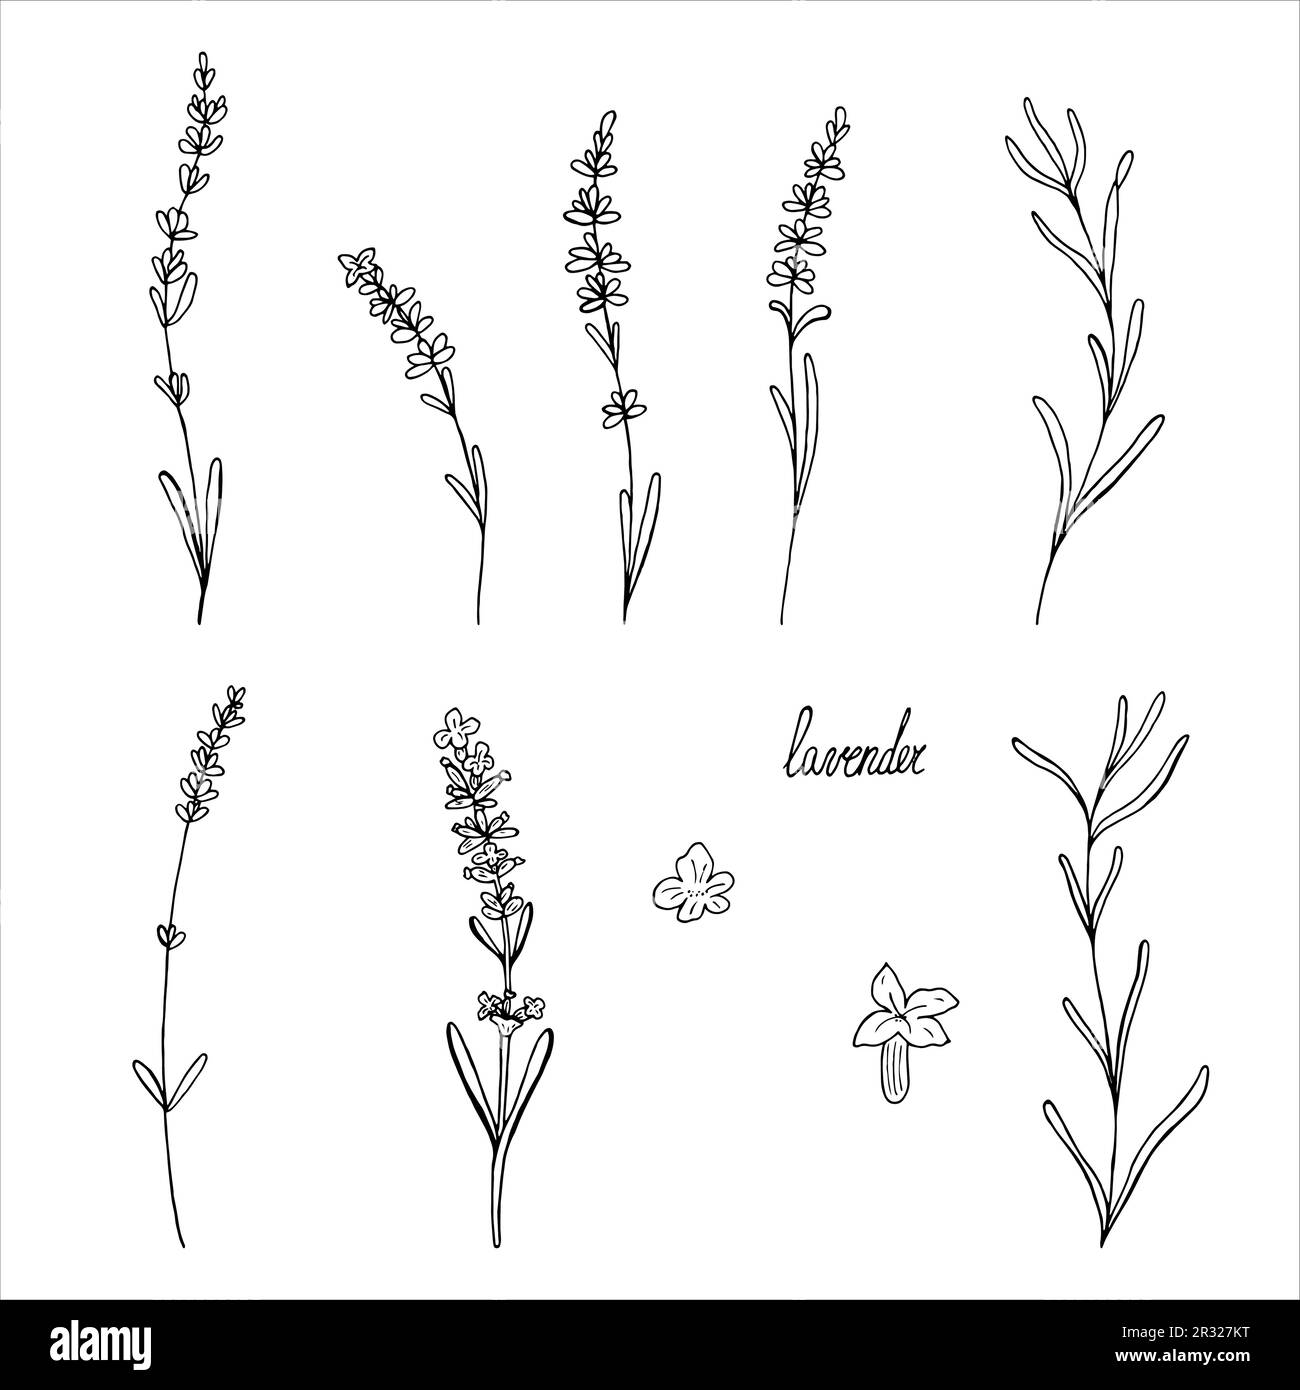 Lavender flower vector set of floral hand drawn isolated elements for design Stock Vector